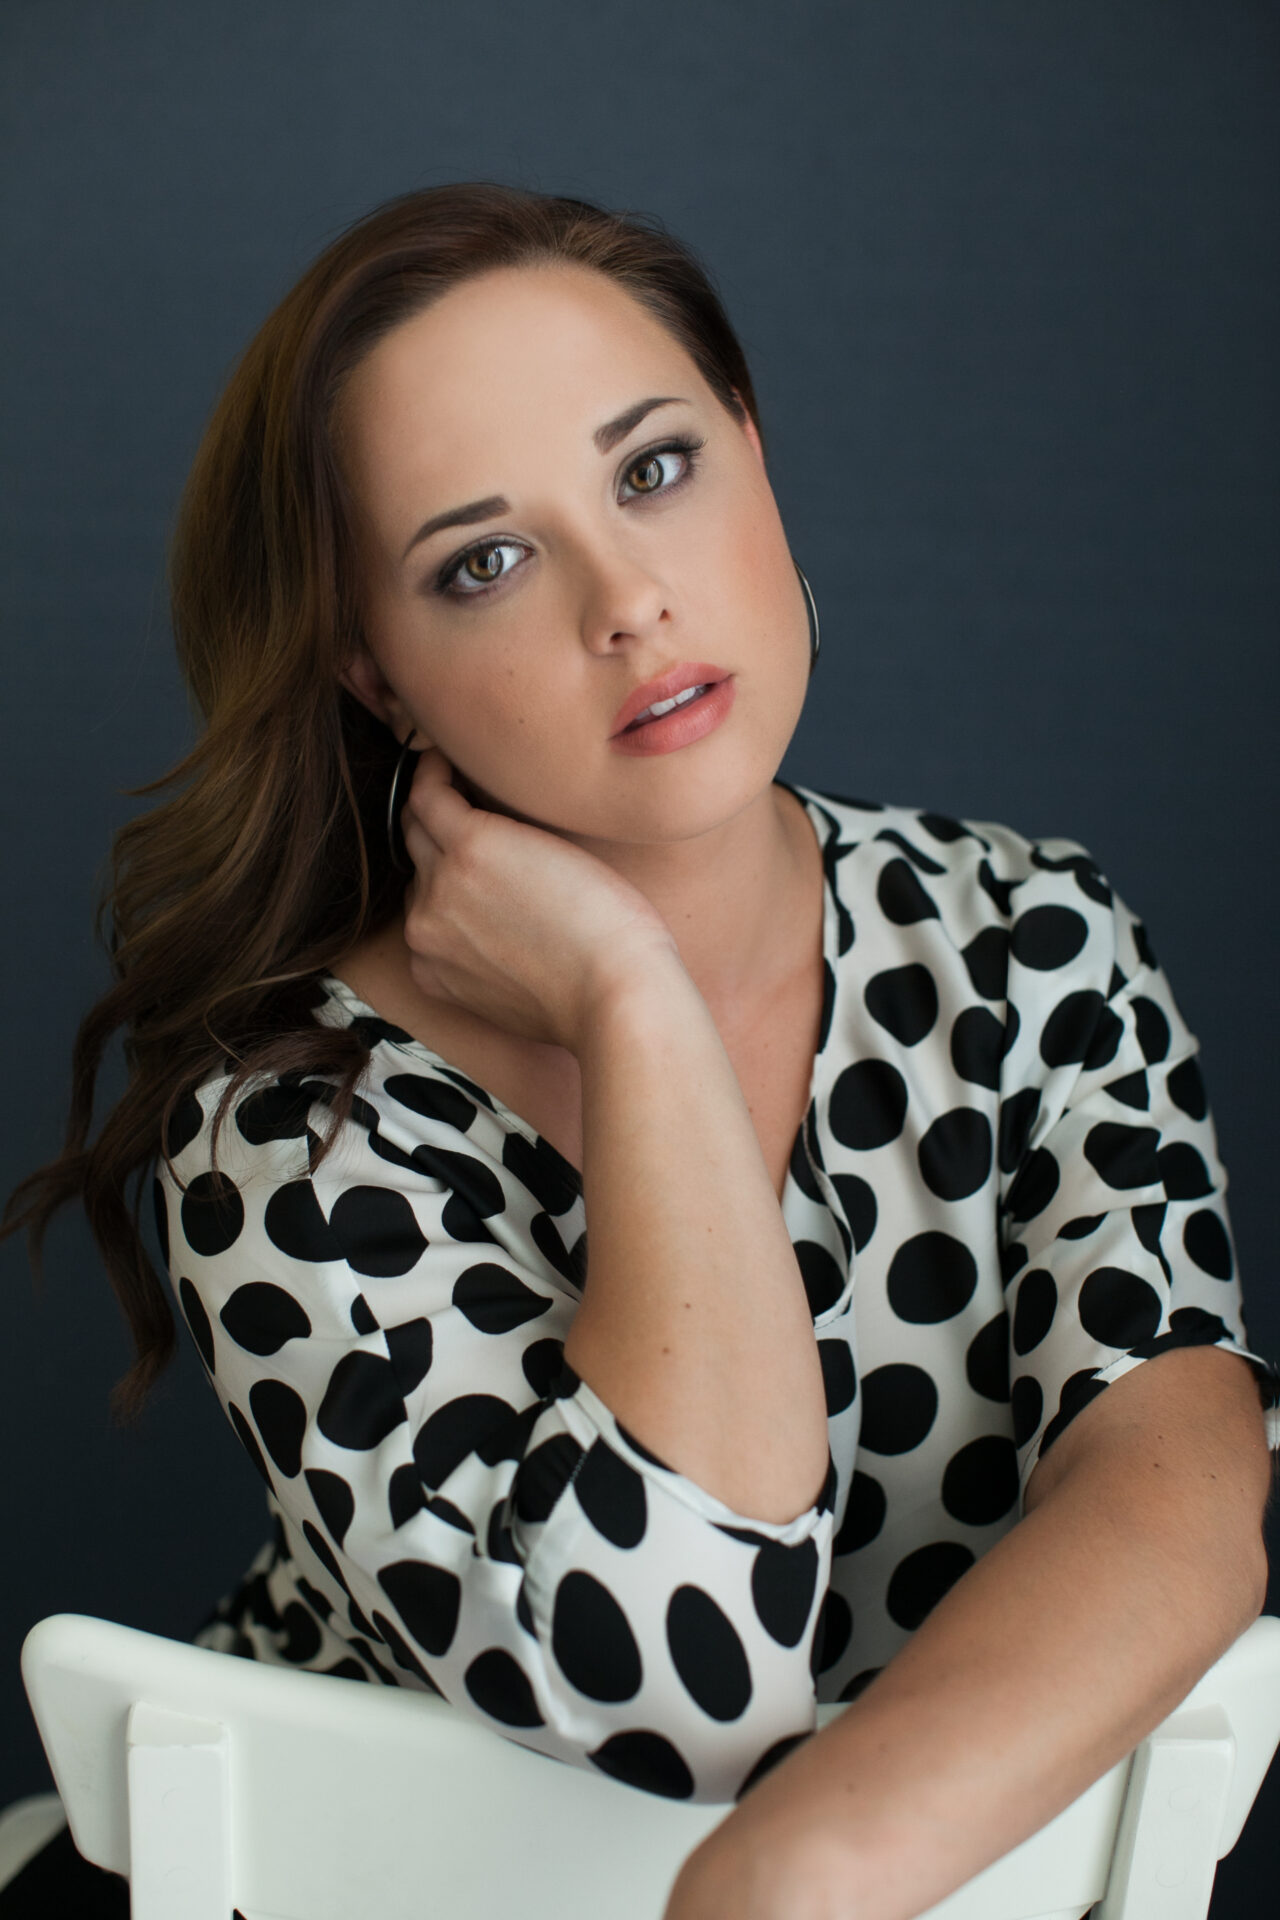 Portrait photo of a woman wearing black and white polka dots by Astrapia Photography